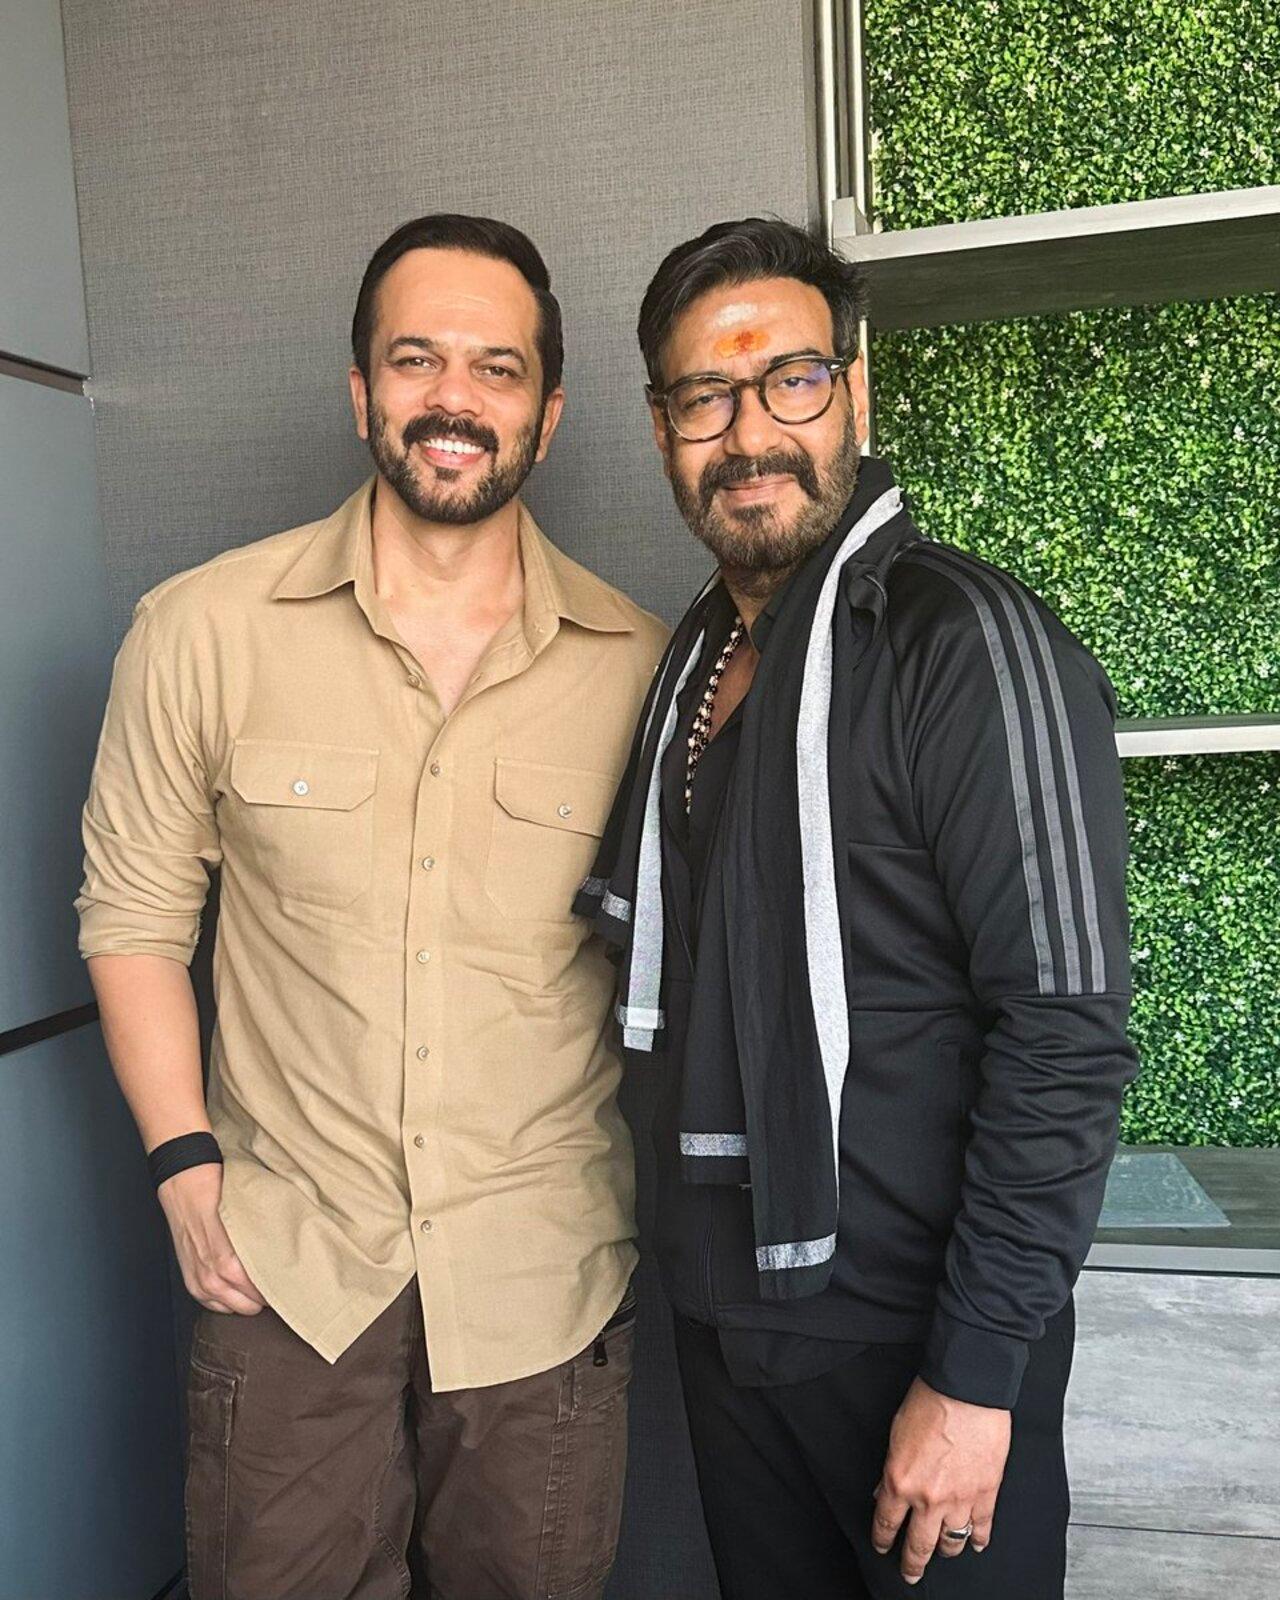 Ajay Devgn-Rohit Shetty: The blockbuster actor-director are expected to grace the show together for the first time. Ajay Devgn and Rohit Shetty are reportedly on the guest list this year. They're currently shooting for Singham Again